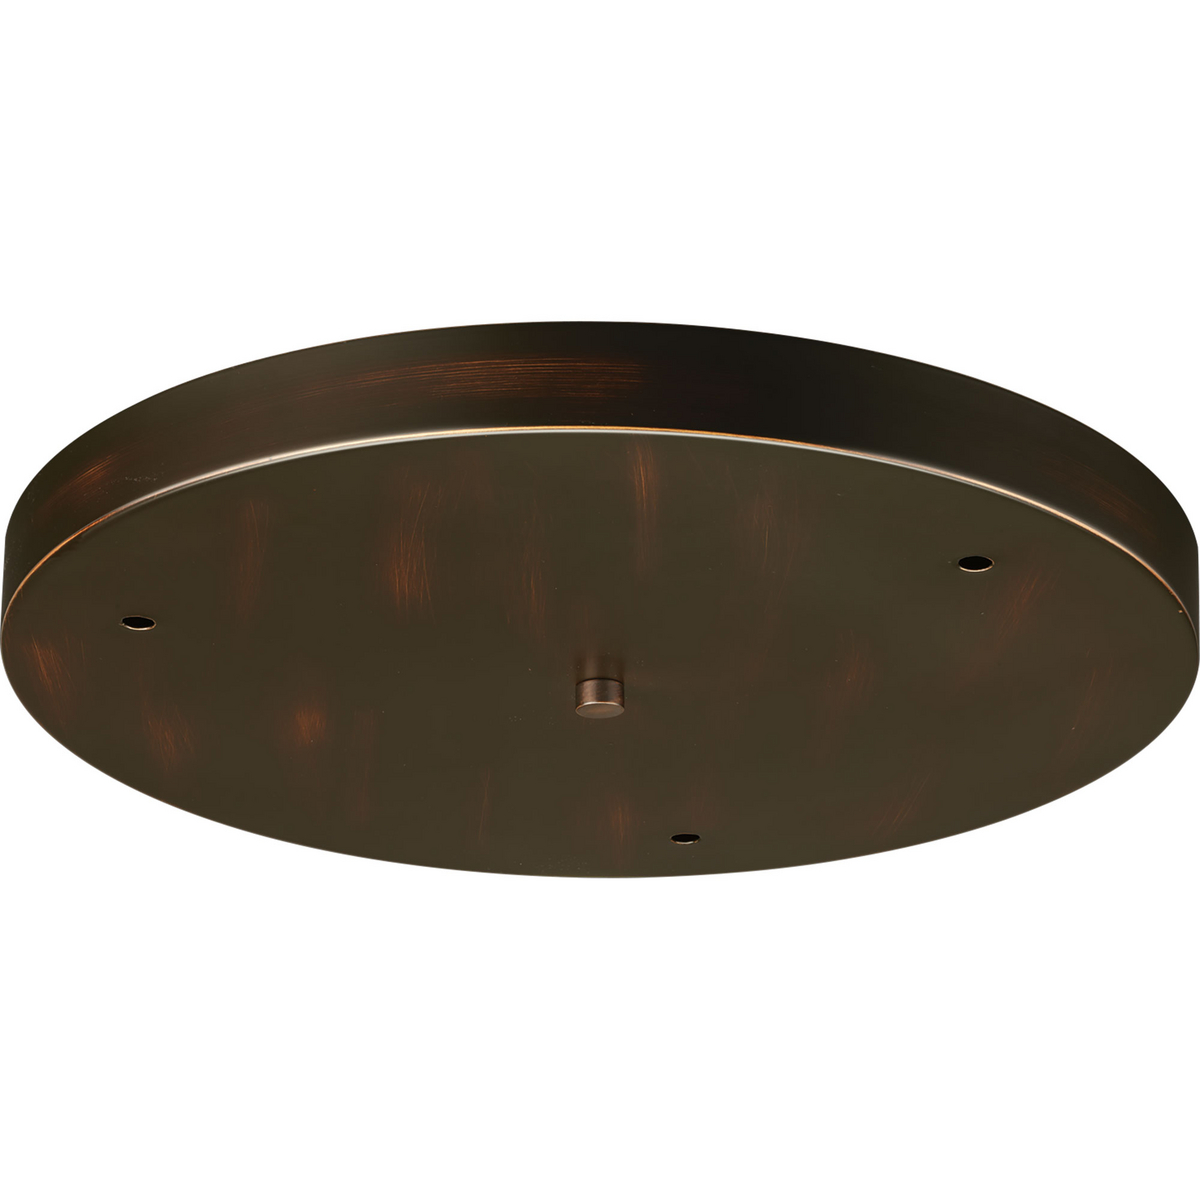 This round pendant accessory allows for the hanging of up to 3 pendants off of one outlet box. Pendants can be mounted staggered or in line. The maximum pendant width for three pendants is 9 inch each. Antique Bronze finish.